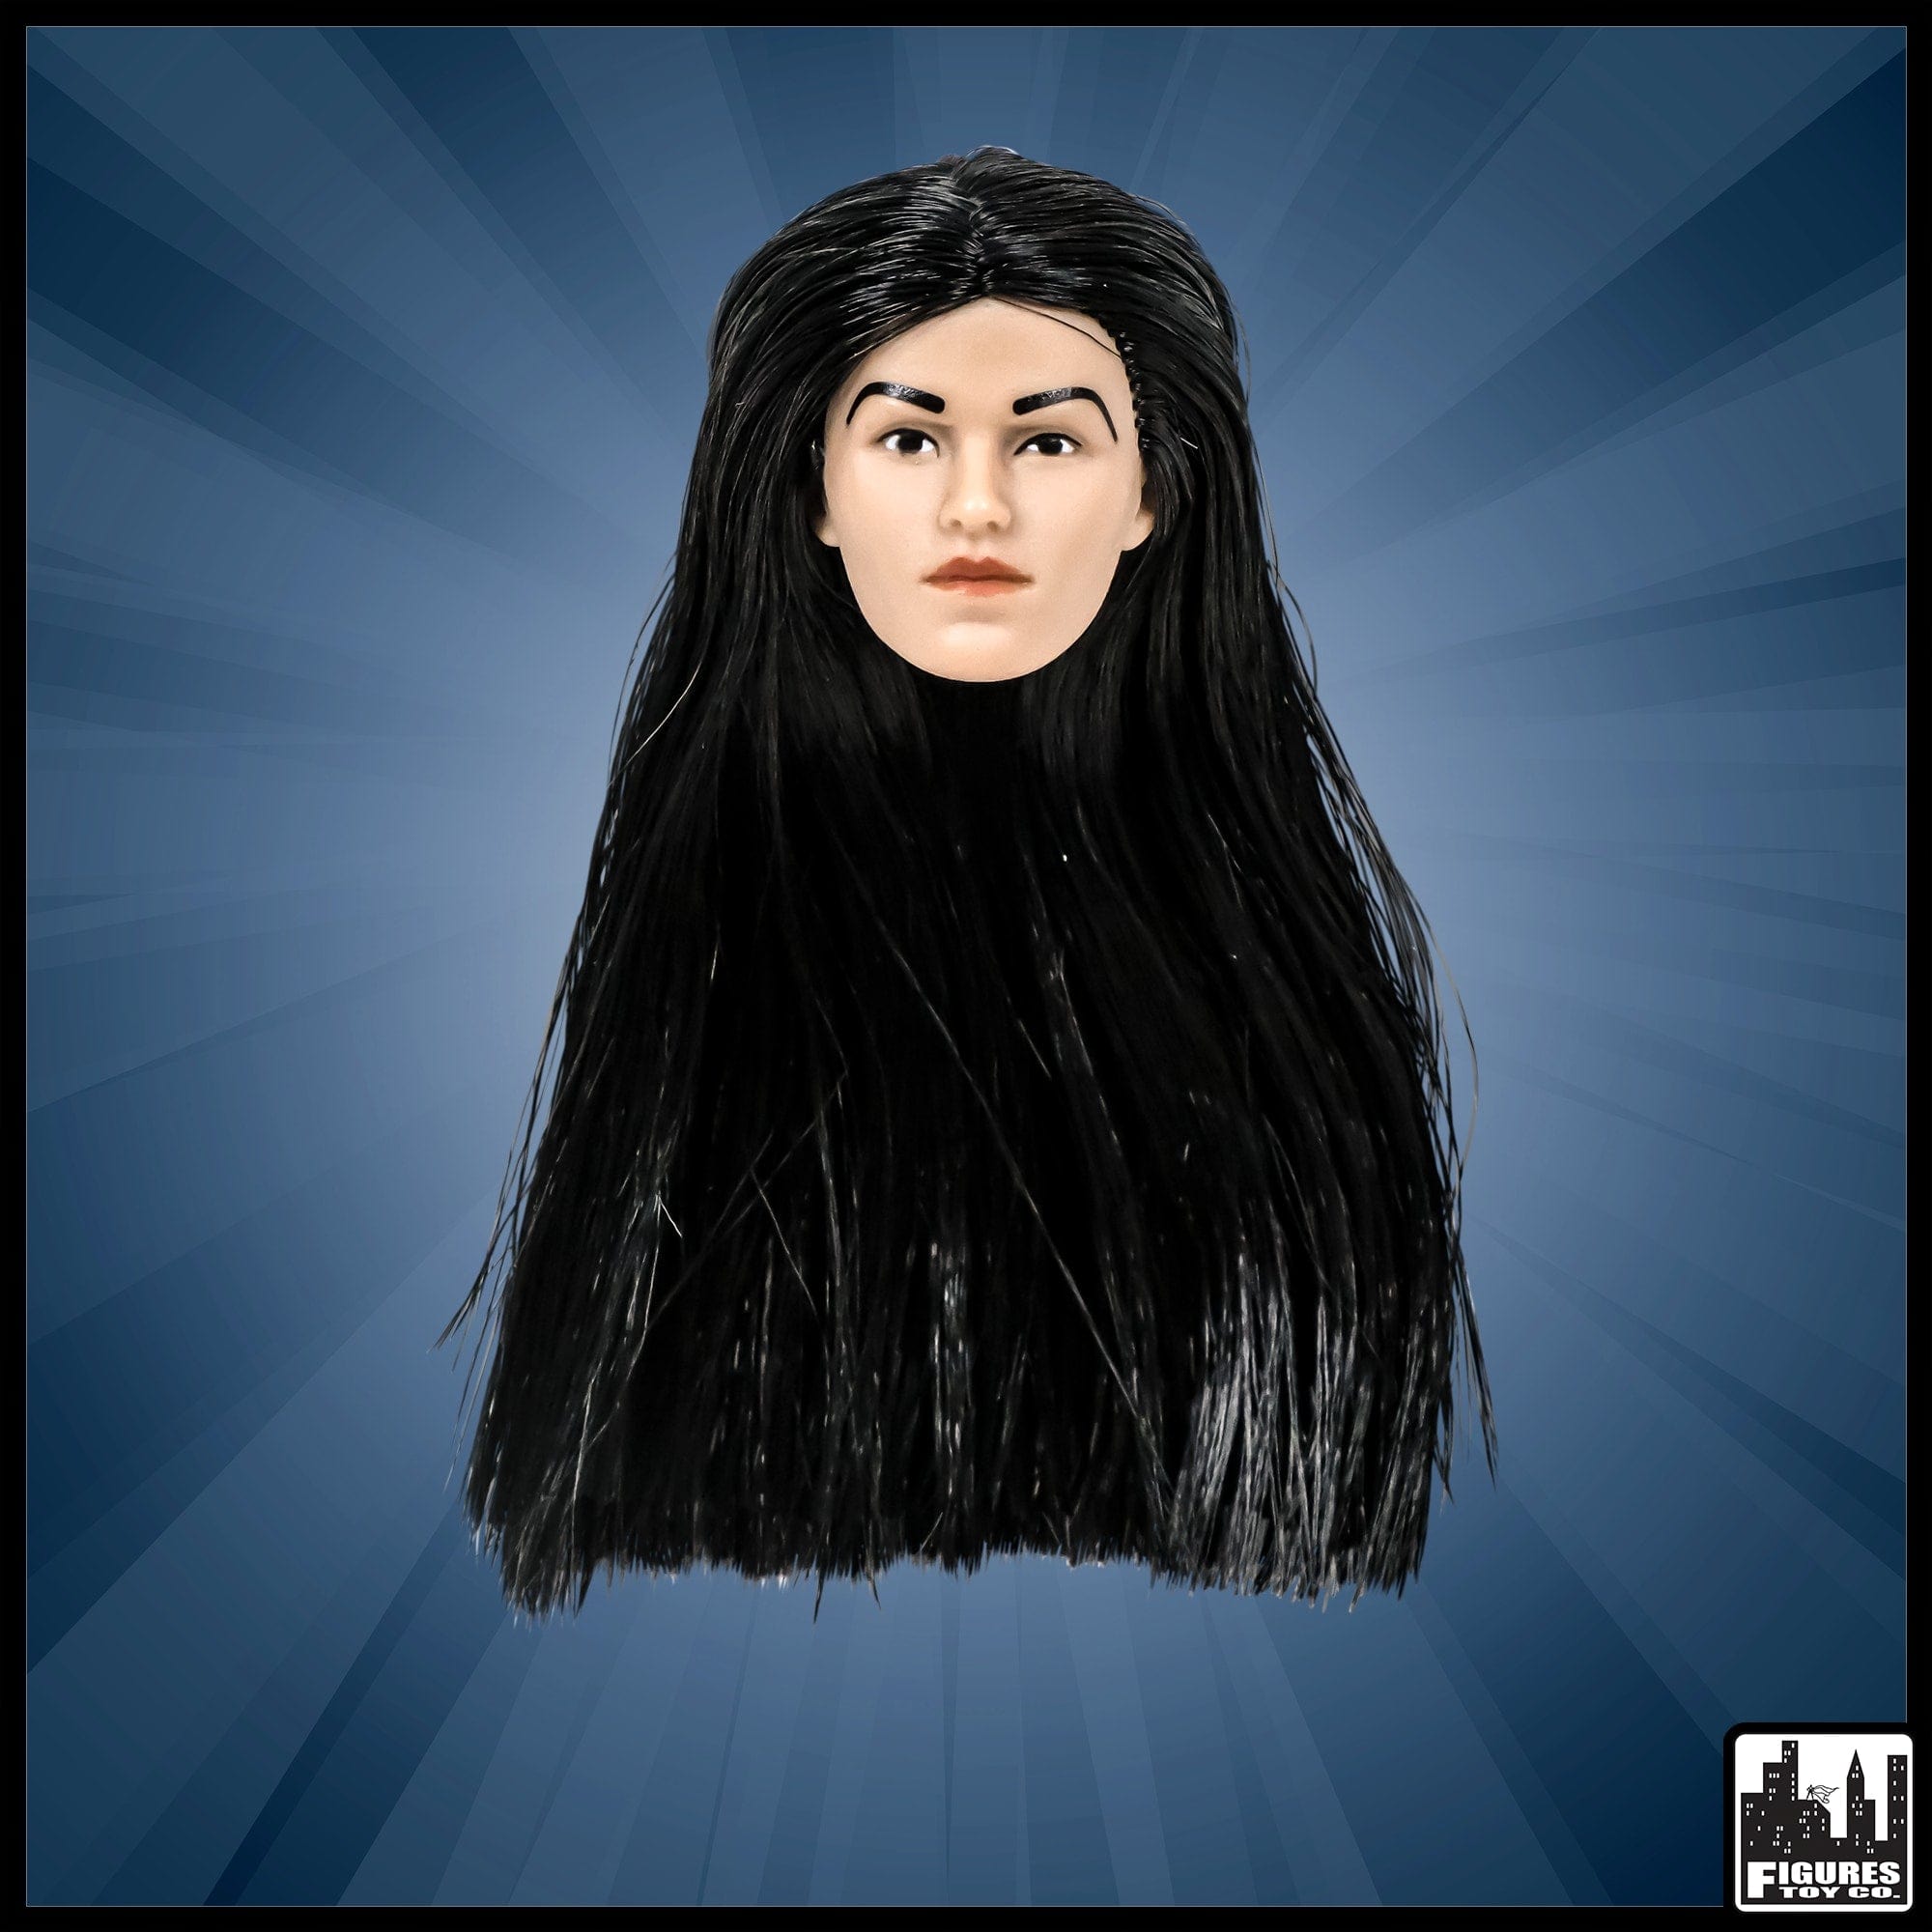 White FEMALE Interchangeable Wrestling Action Figure Head With Long Black Hair